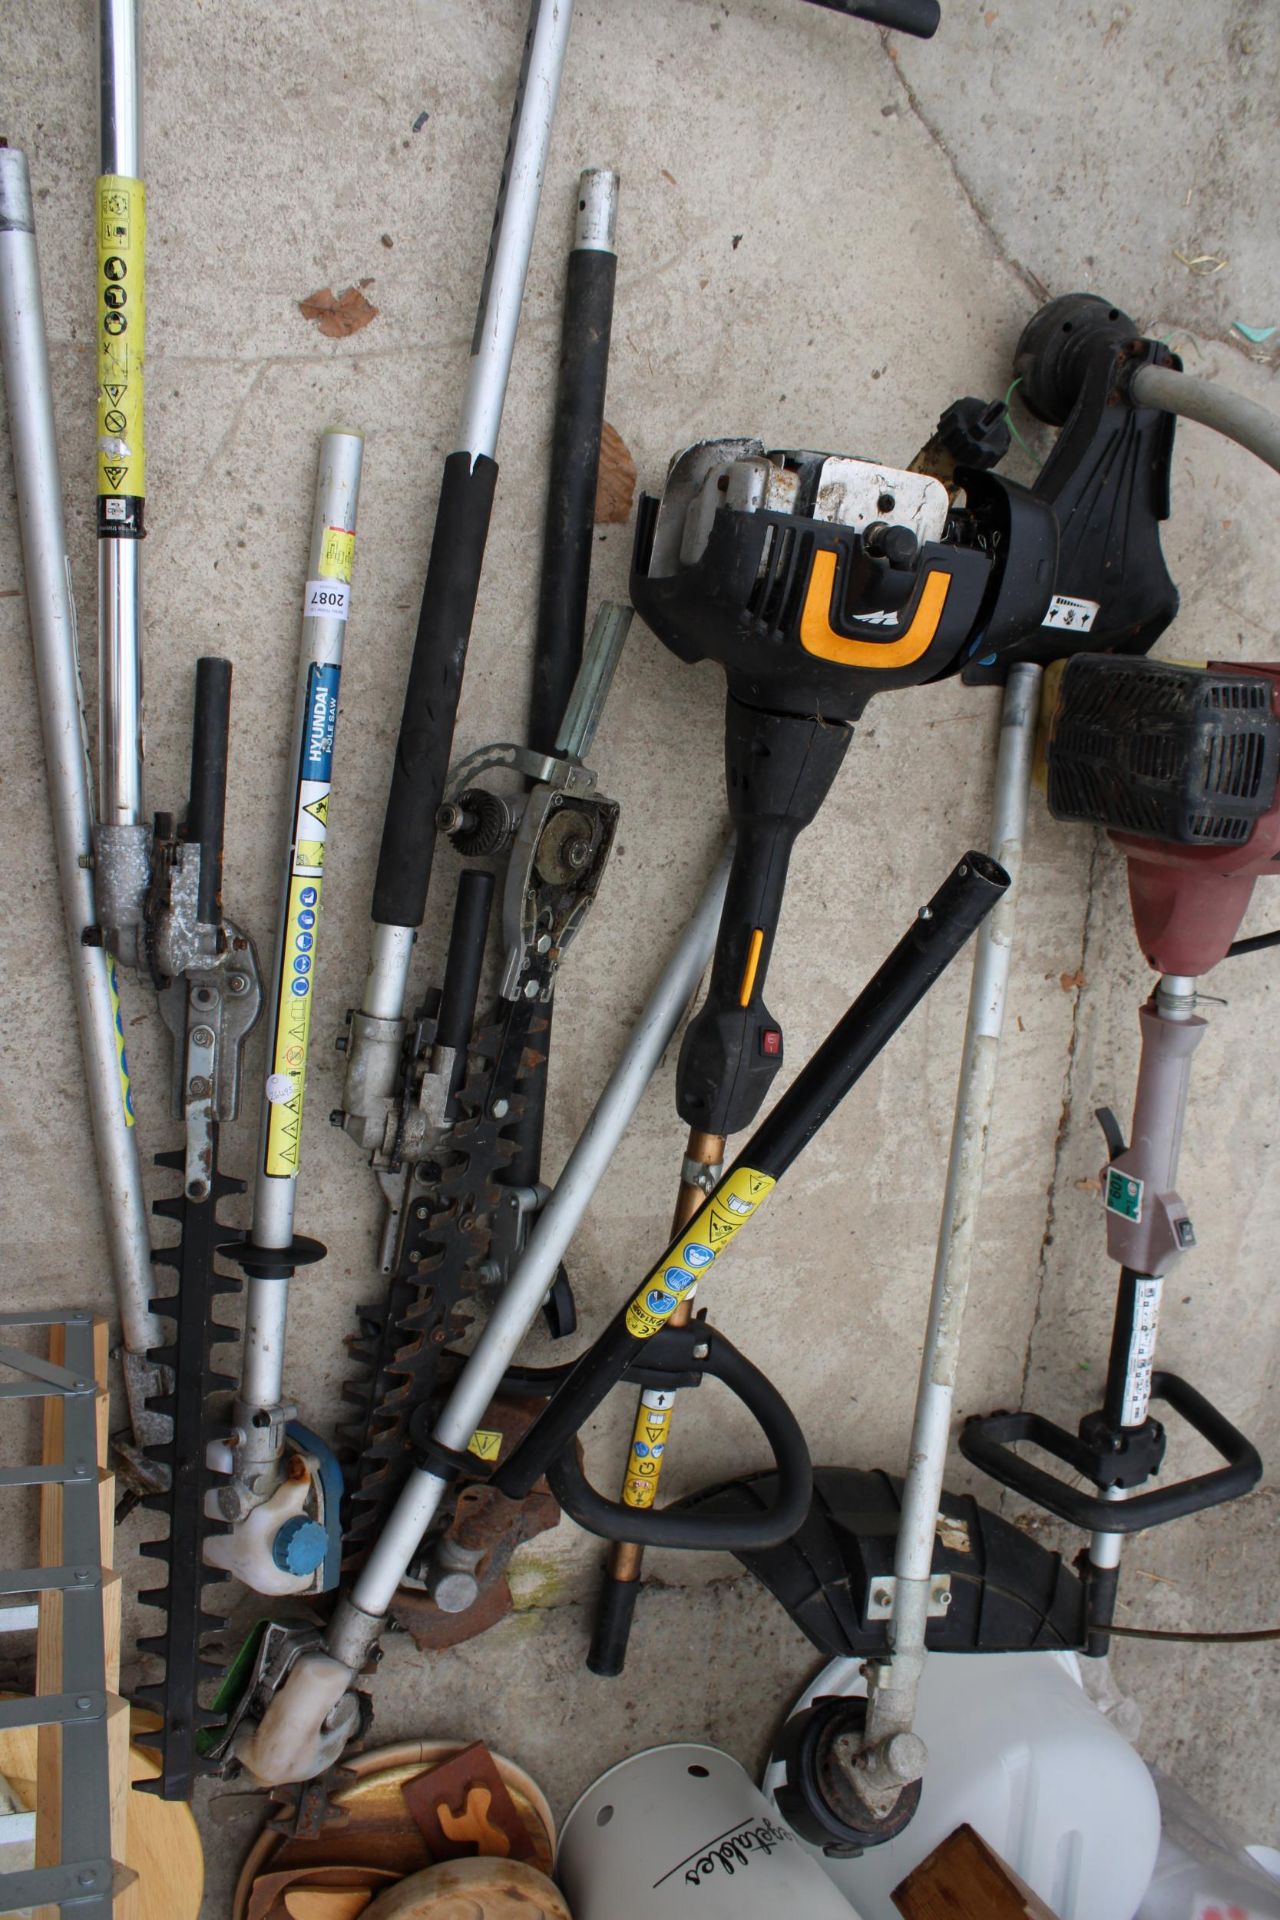 TWO PETROL STRIMMER BODIES AND AN ASSORTMENT OF LONG REACH HEDGE TRIMMER ATTATCHMENTS AND STRIMMER - Image 2 of 3